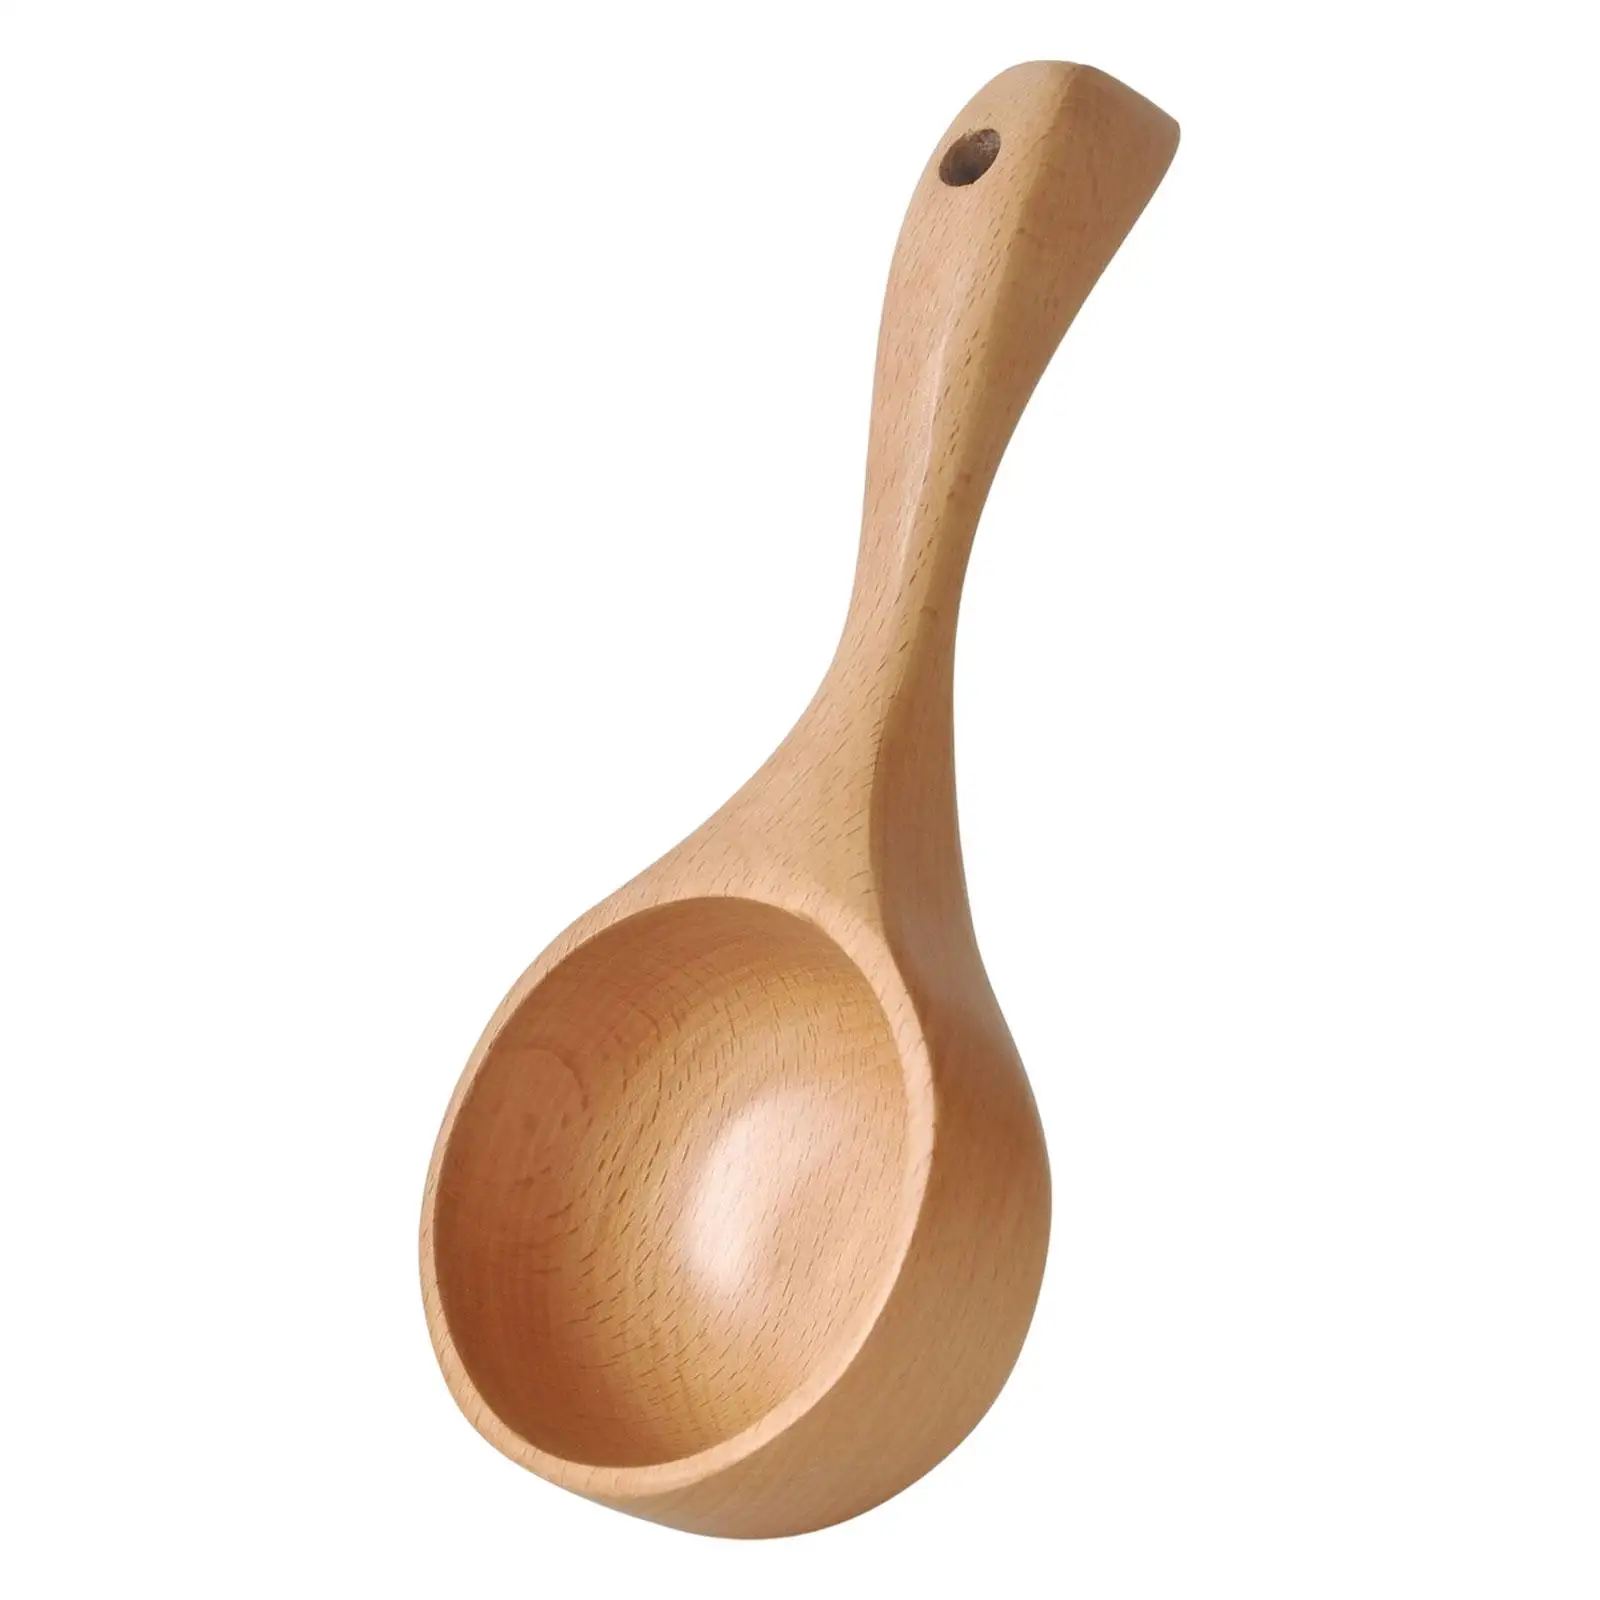 Multipurpose Wooden Ladle Spoon Handmade Kitchen Utensil Soup Spoon Water Spoon for Cooking Canisters Flour Rice Porridge Sauna